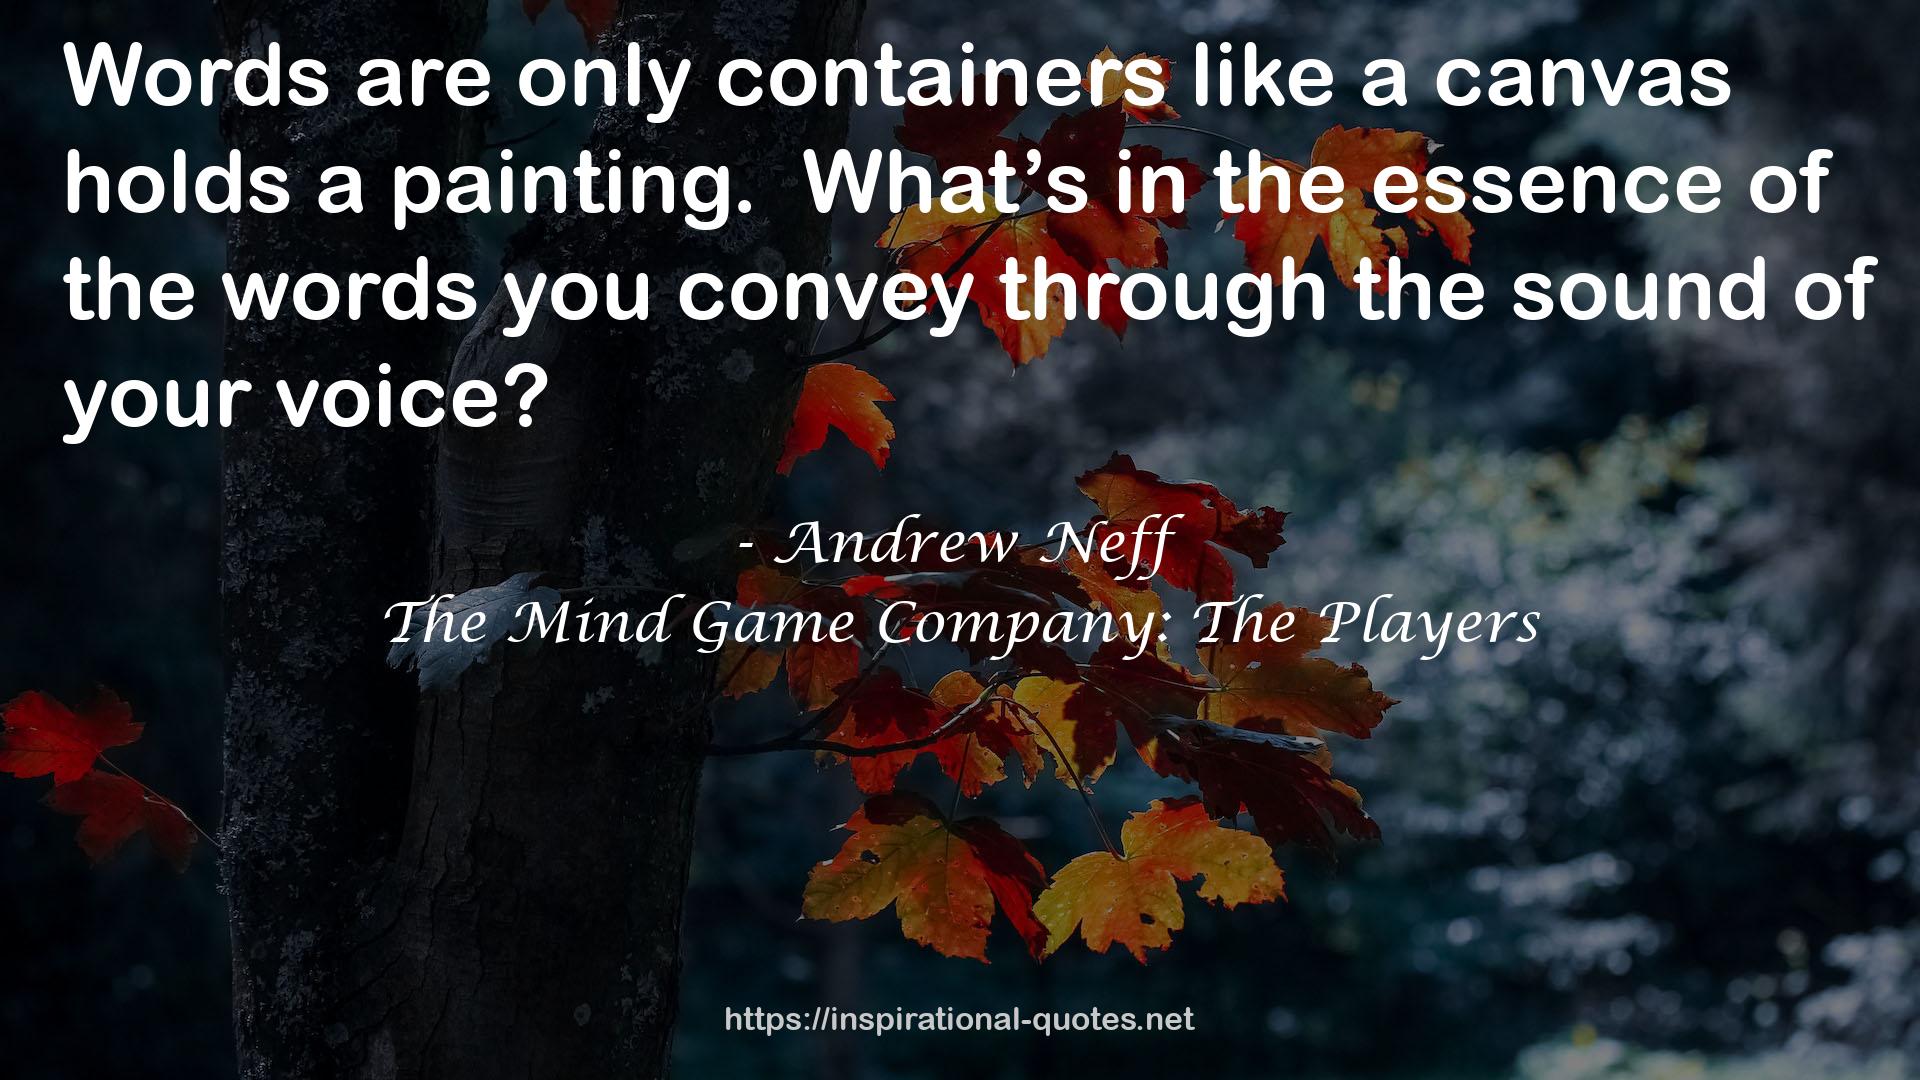 The Mind Game Company: The Players QUOTES